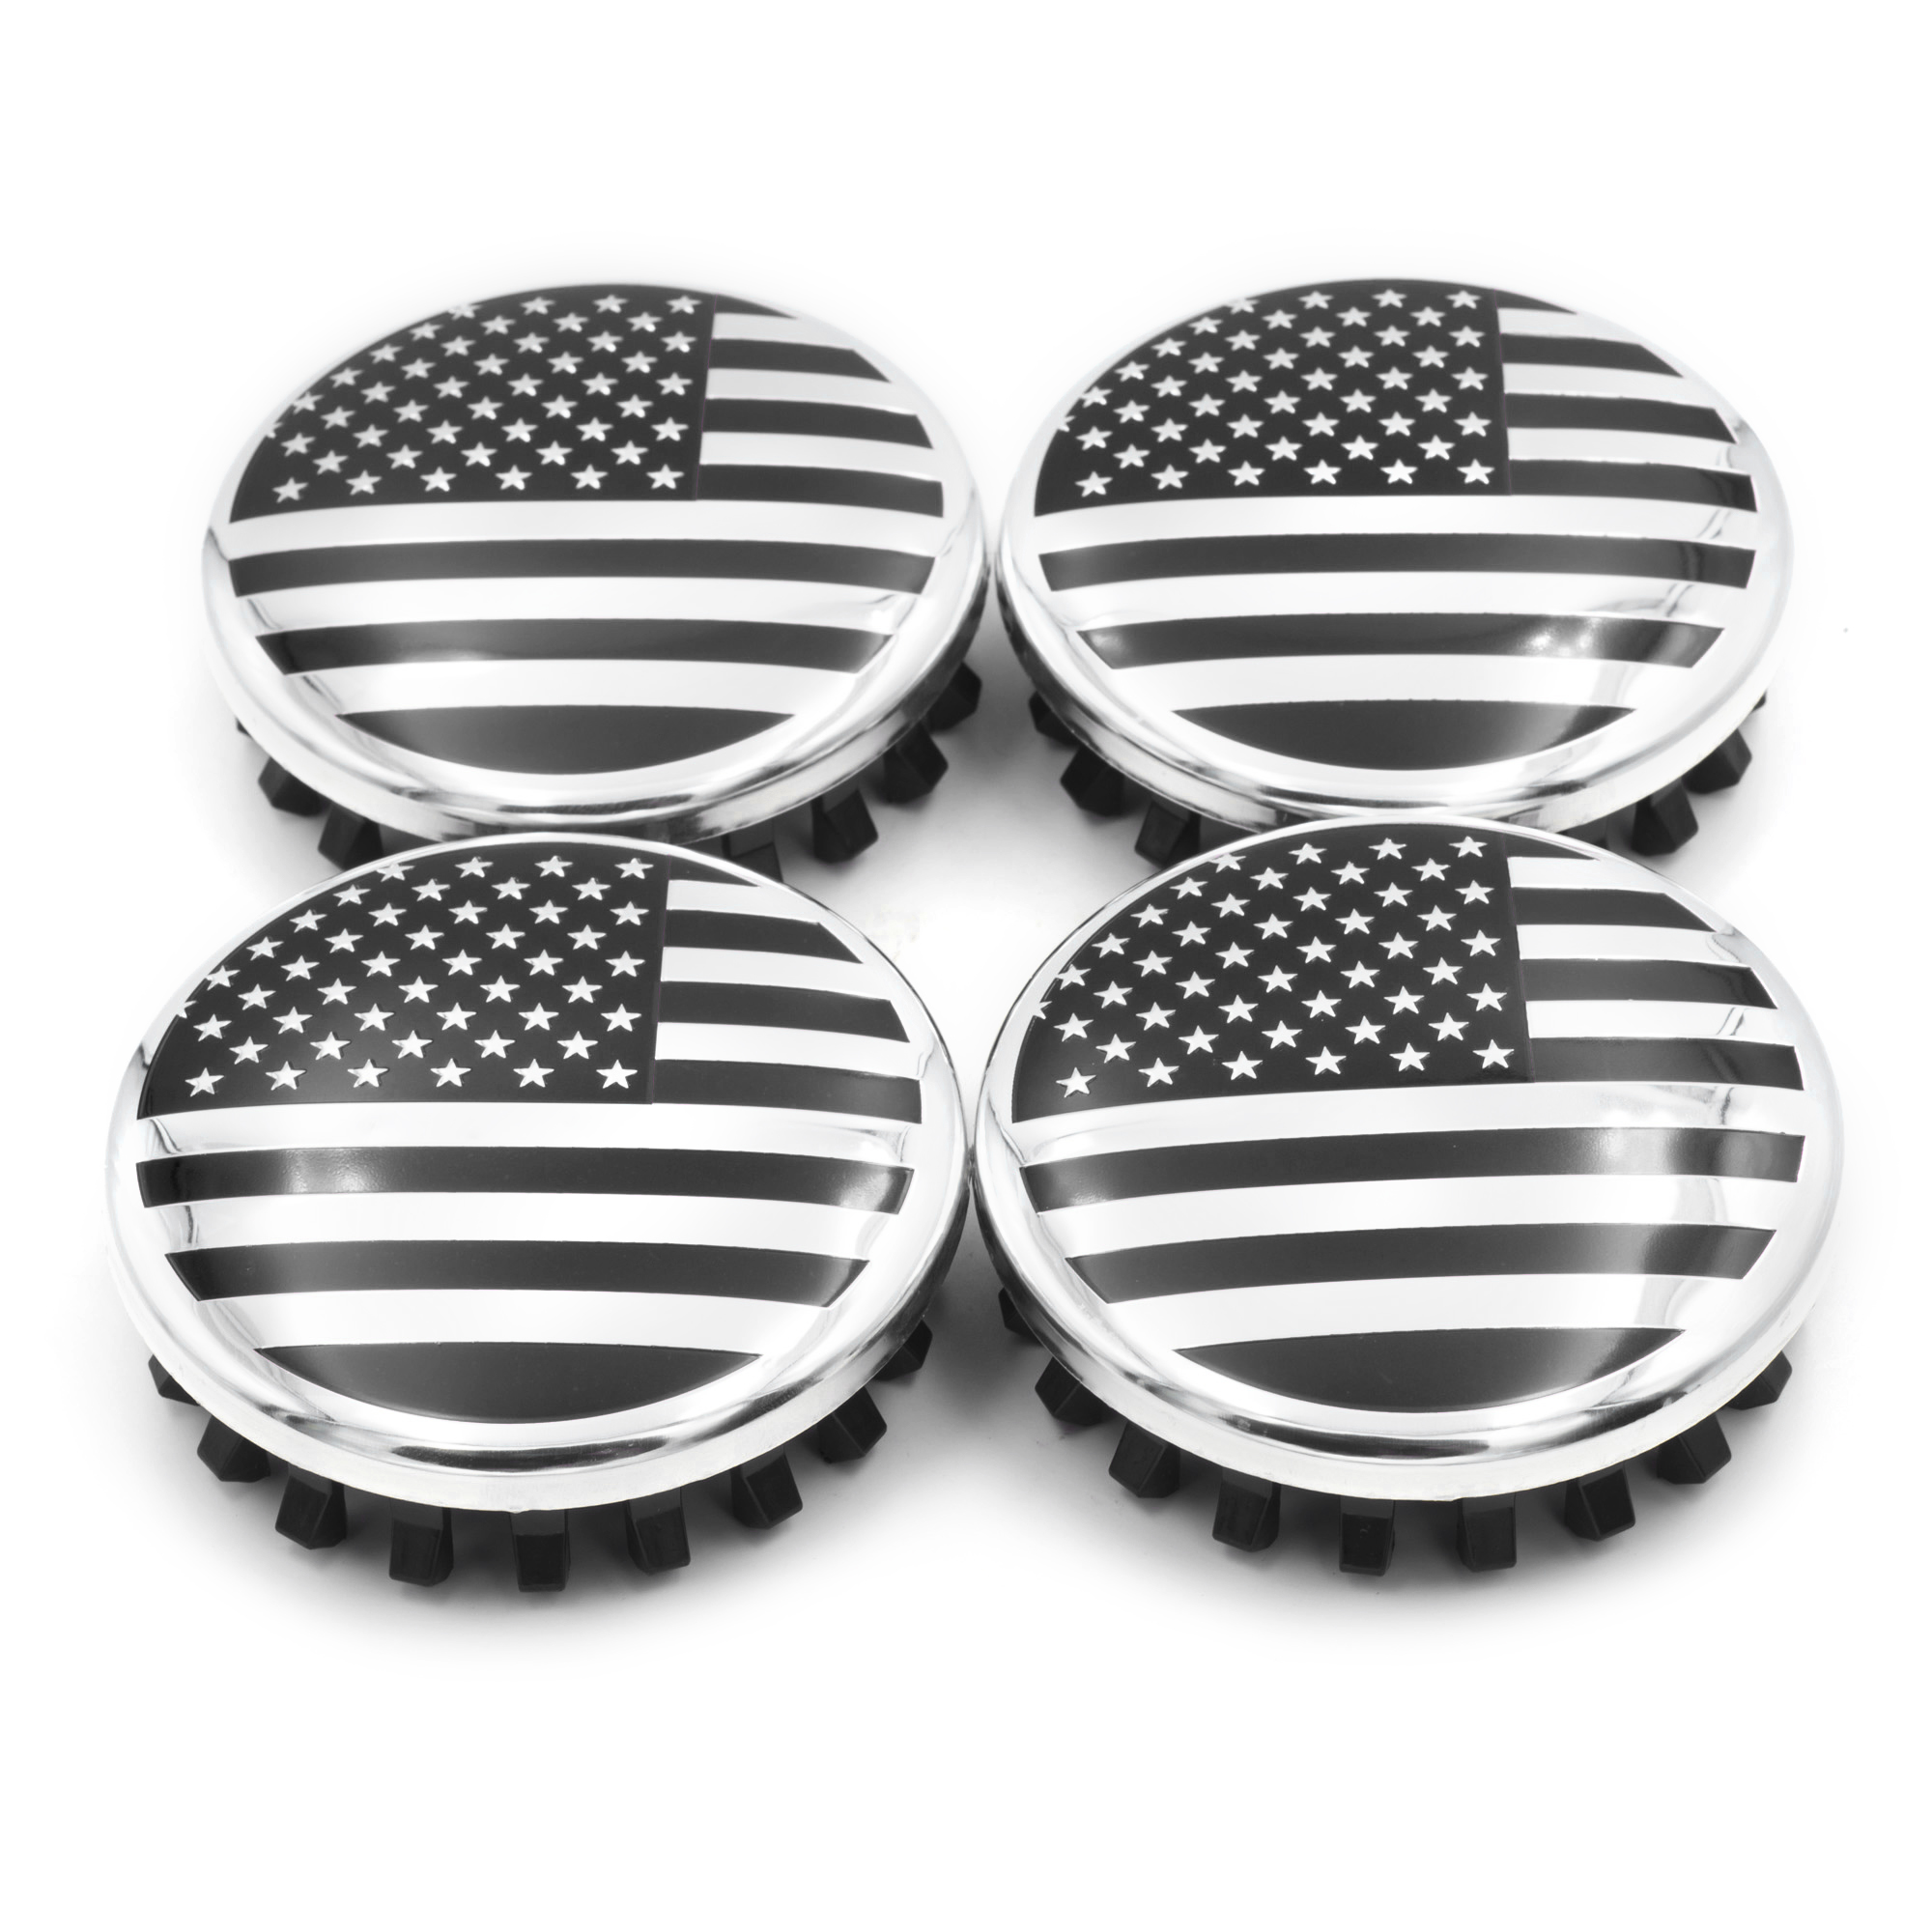 83mm Wheel Center Caps for Chevy and GMC